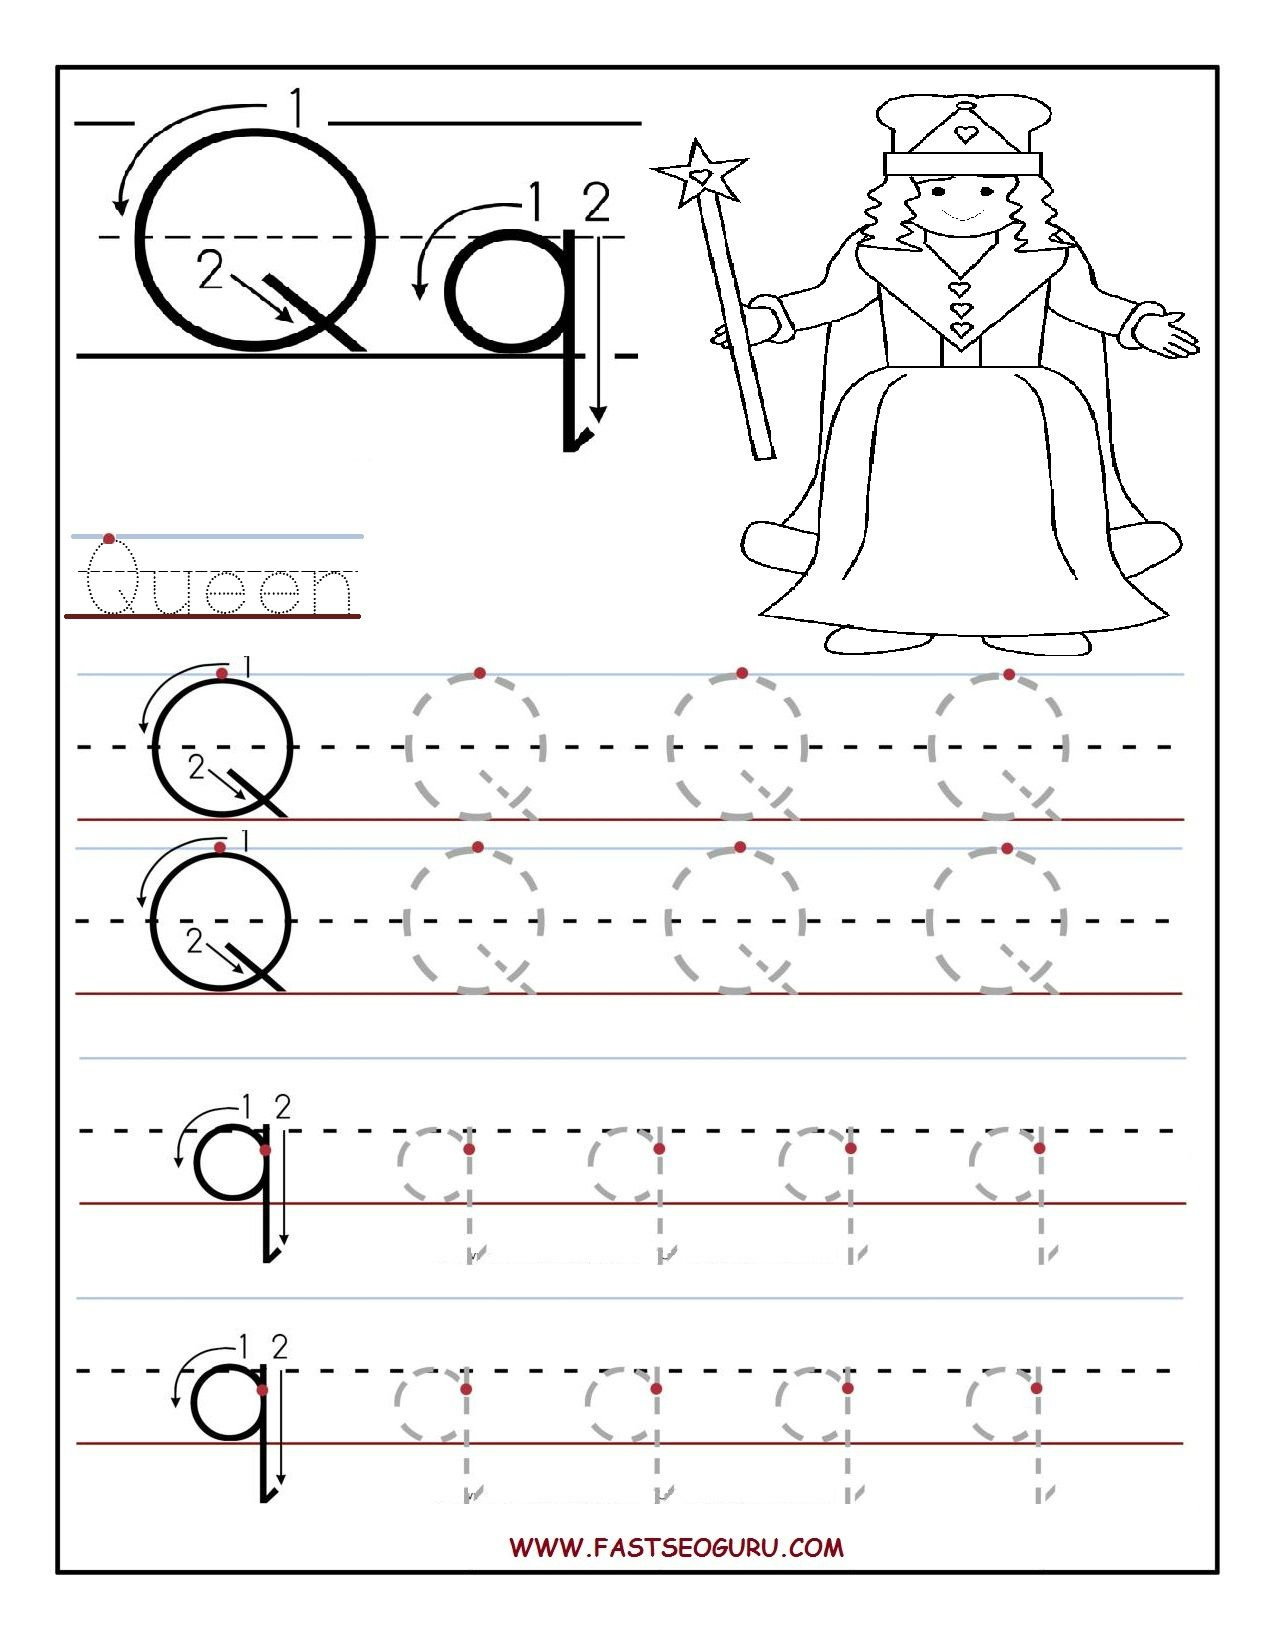 Letter Q Tracing Worksheets For Preschool Google Search Alphabet 